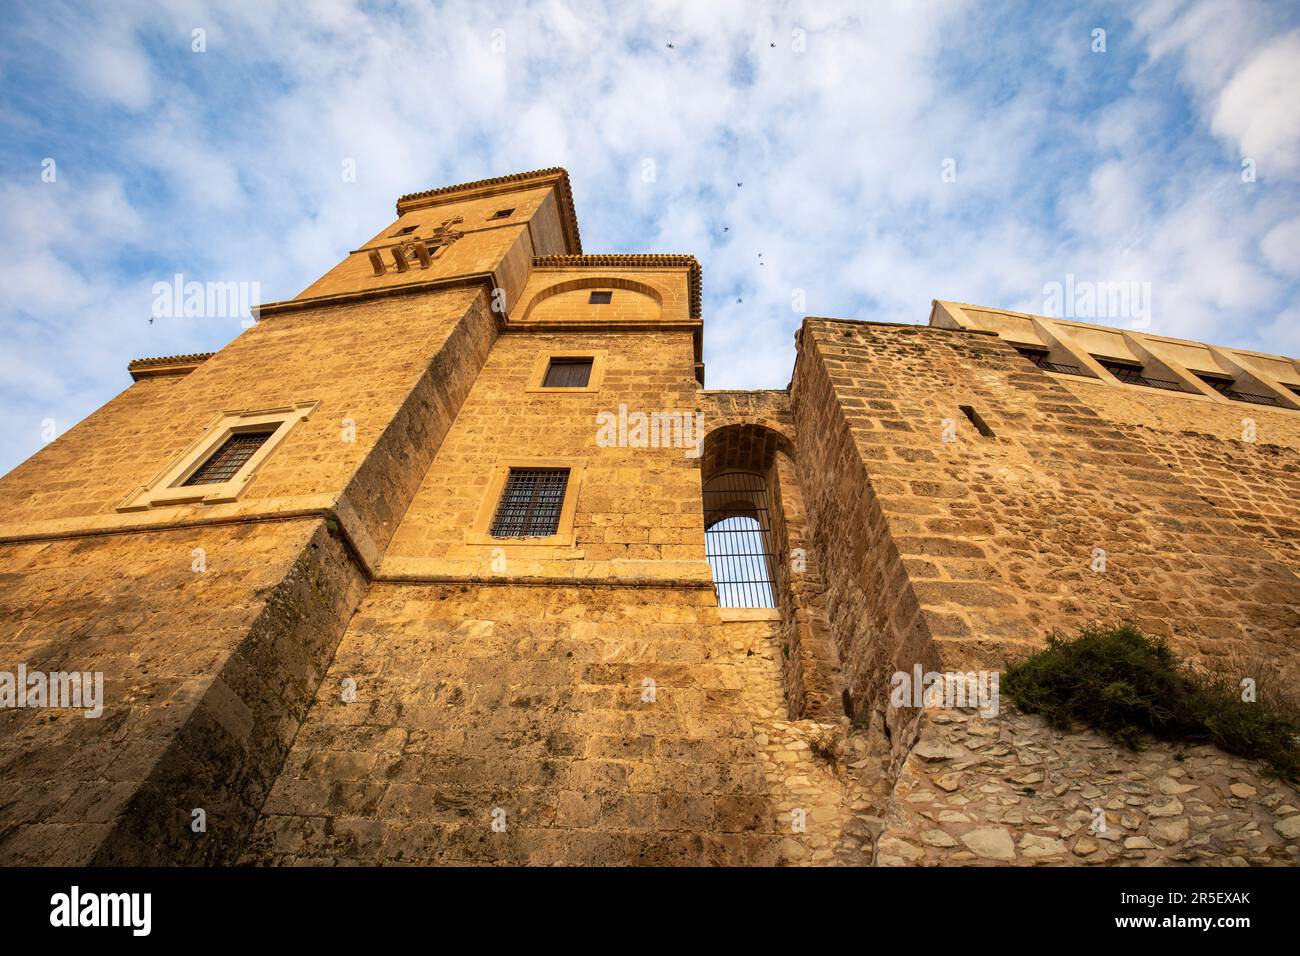 View from below of the impressive medieval walls of the castle of Caravaca, Murcia, Spain. Stock Photo